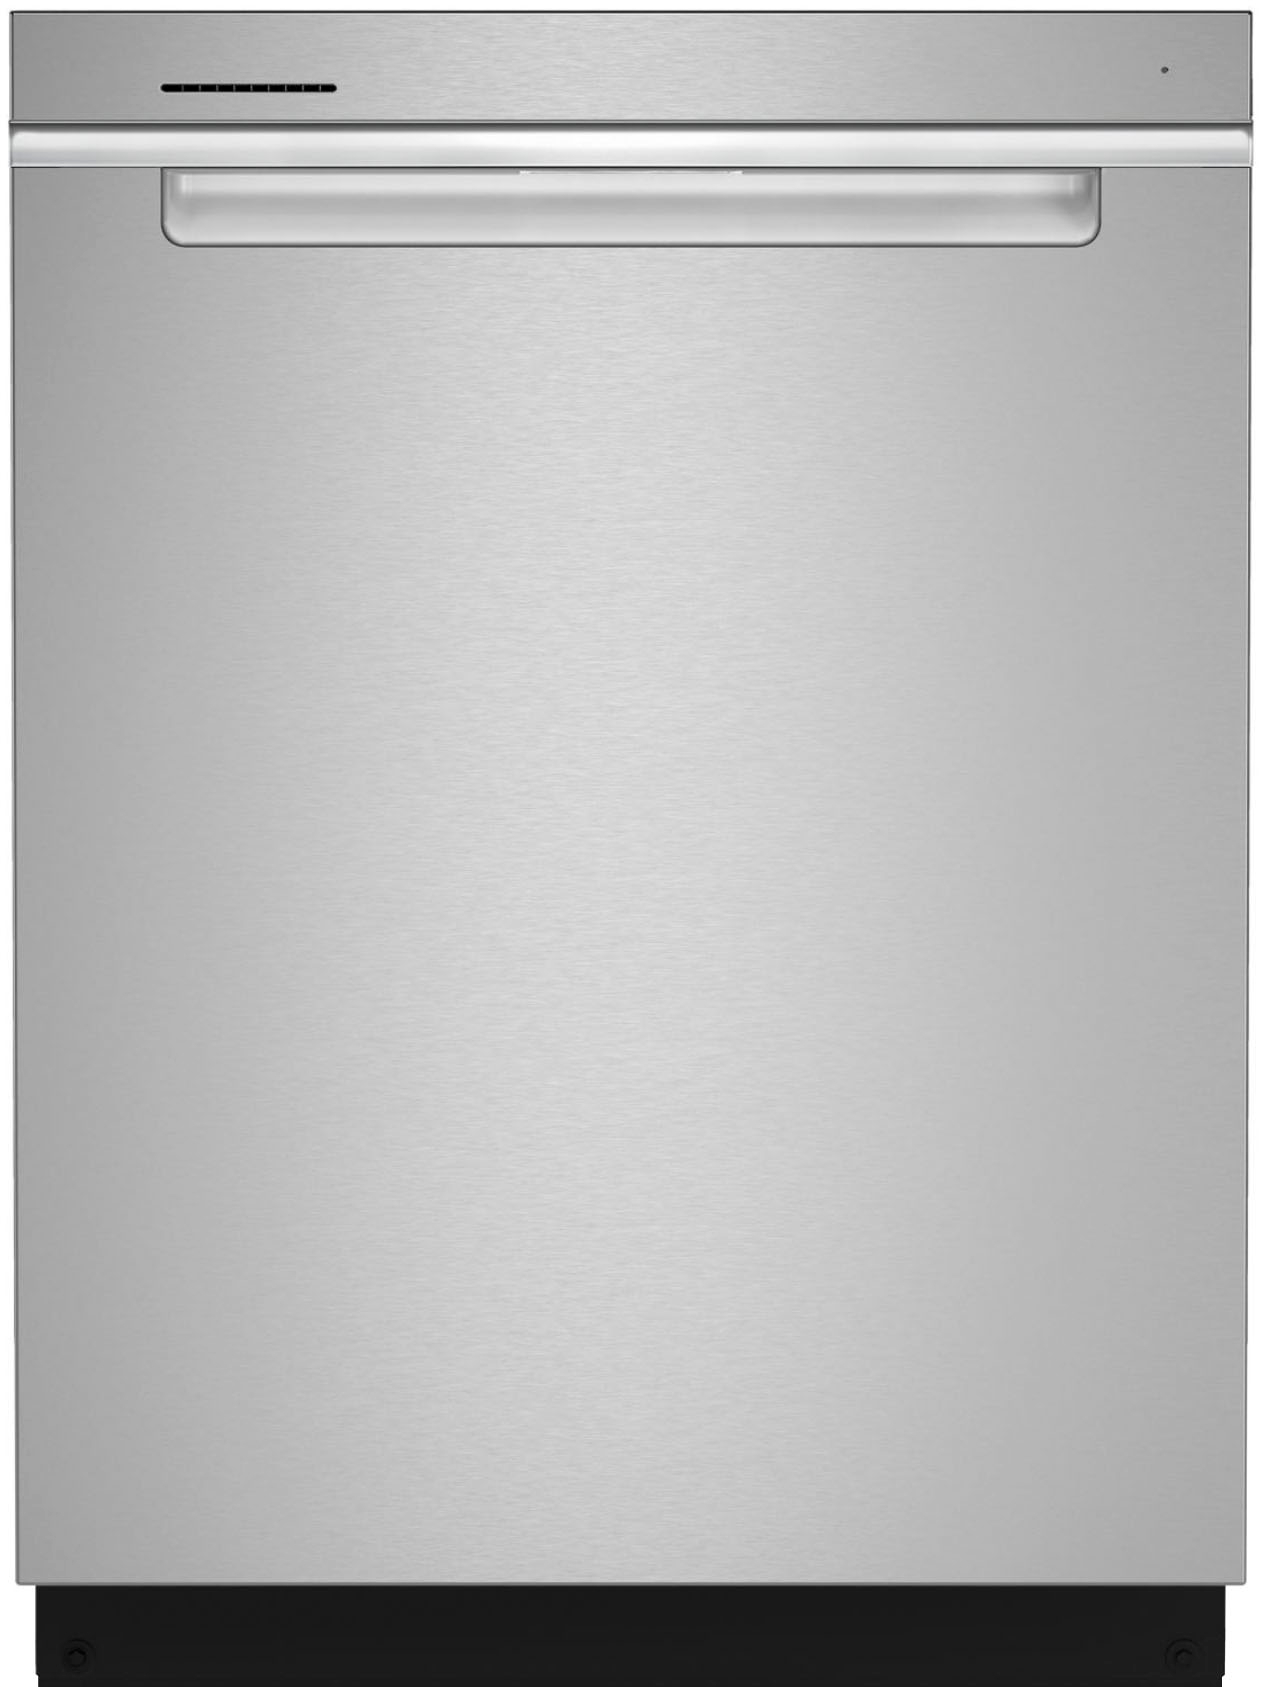 Whirlpool – 24″ Top Control Built-In Dishwasher with Stainless Steel Tub, Large Capacity, 3rd Rack, 47 dBA – Fingerprint Resistant Stainless Steel